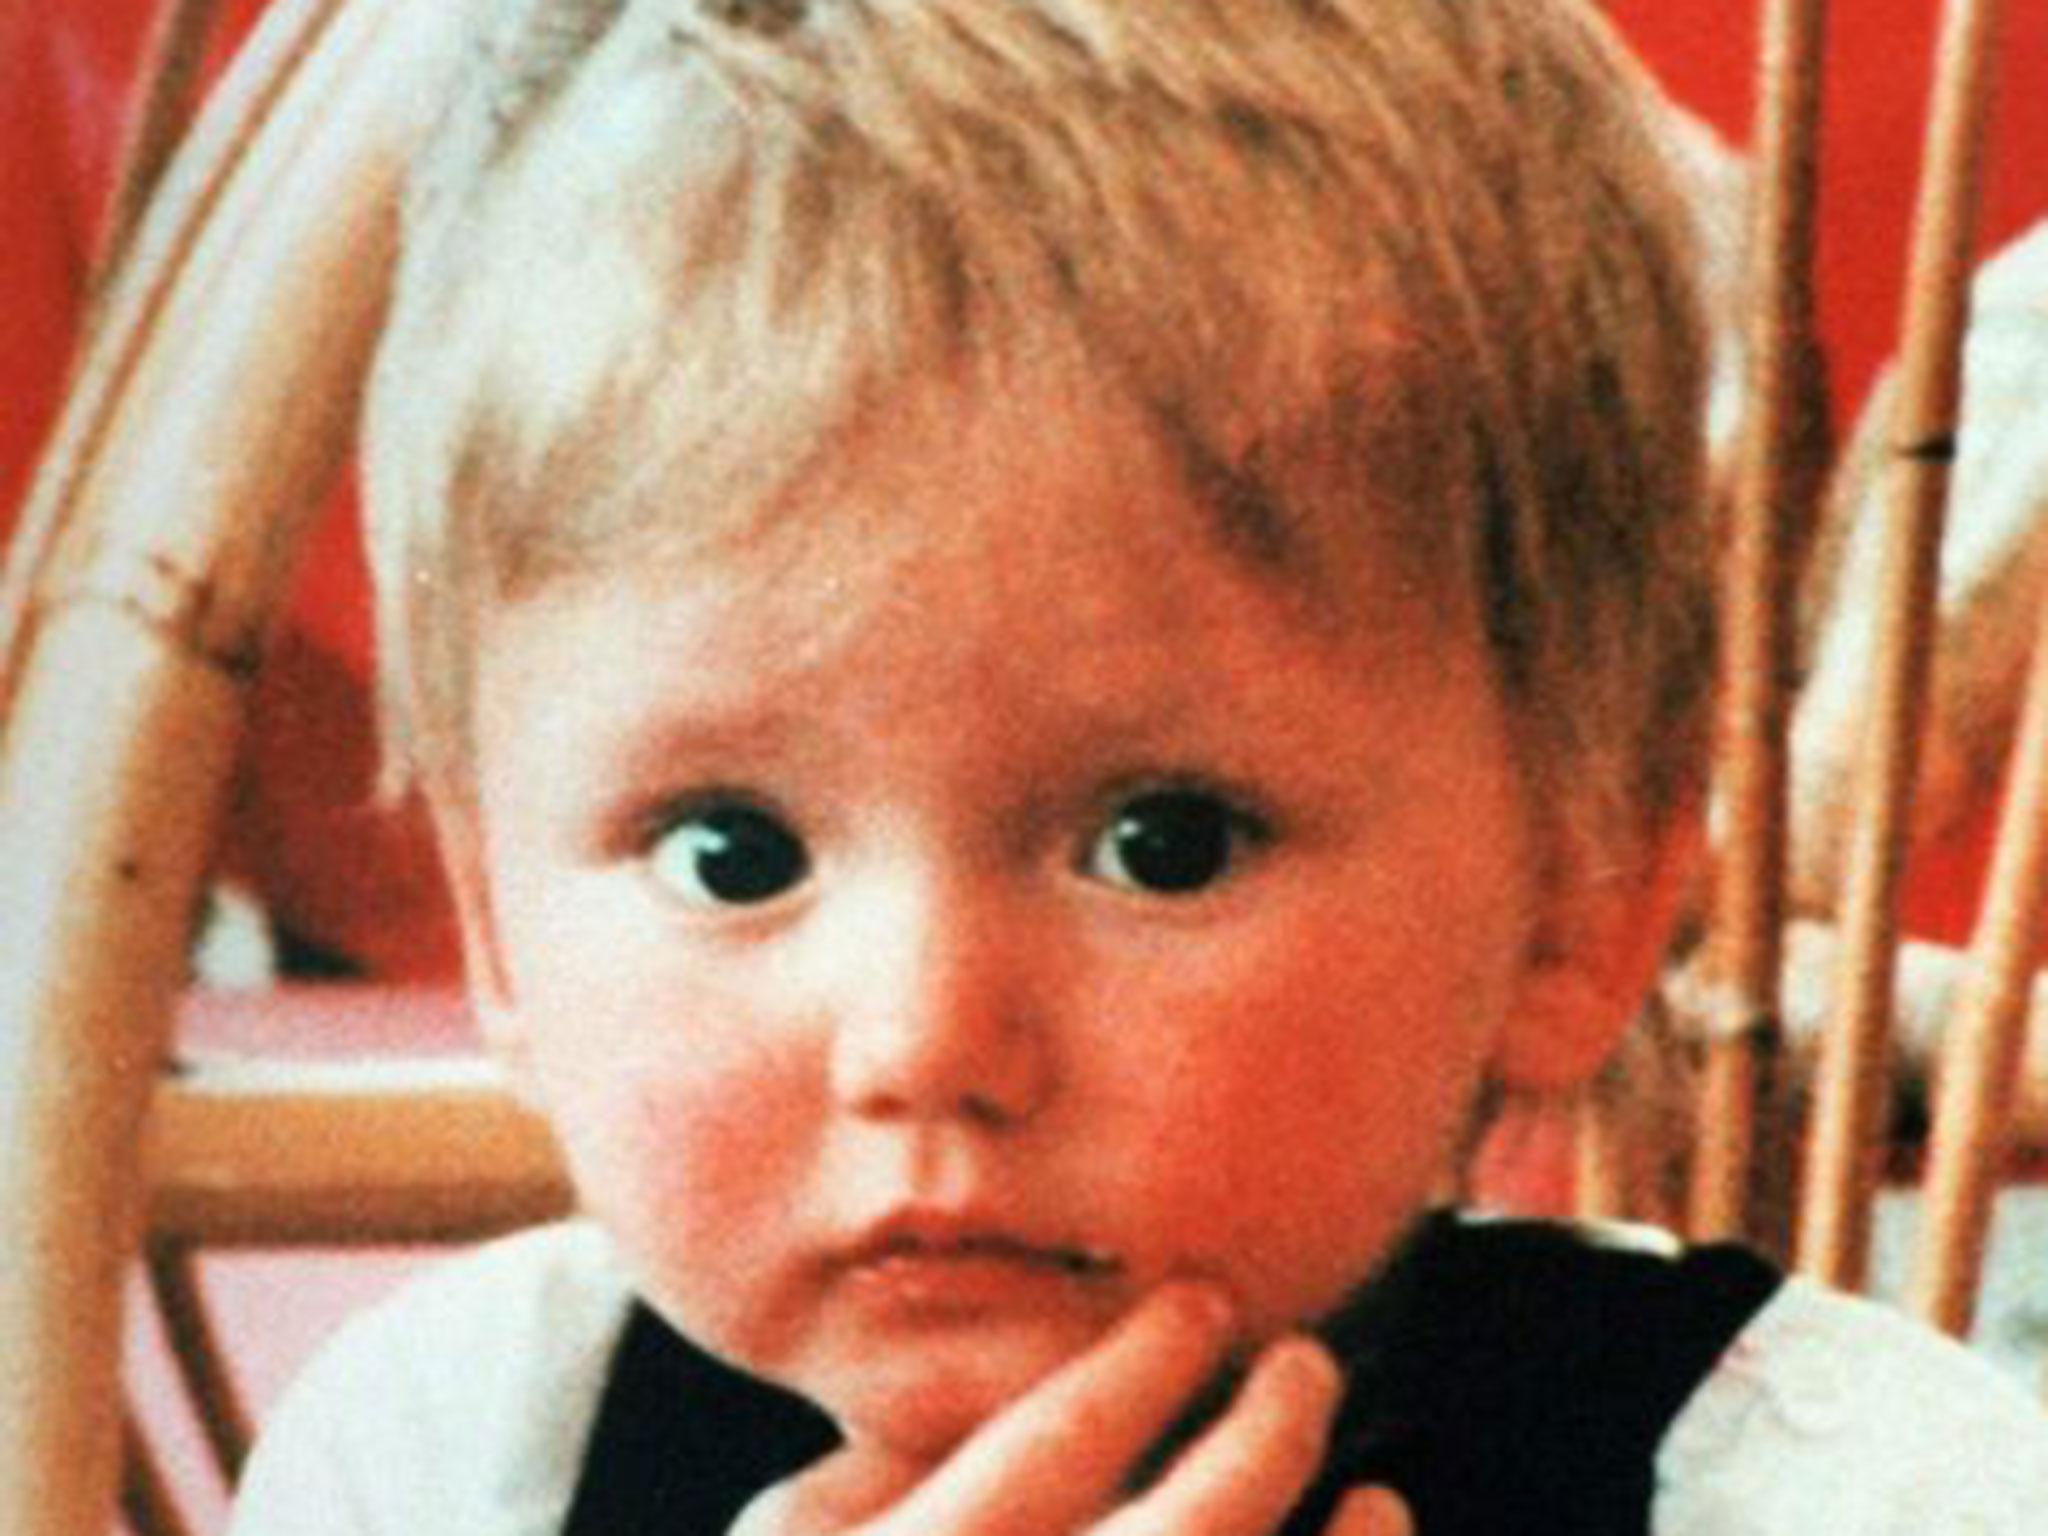 Despite numerous reported sightings of Ben Needham since he went missing in 1991, no trace of the him has been found